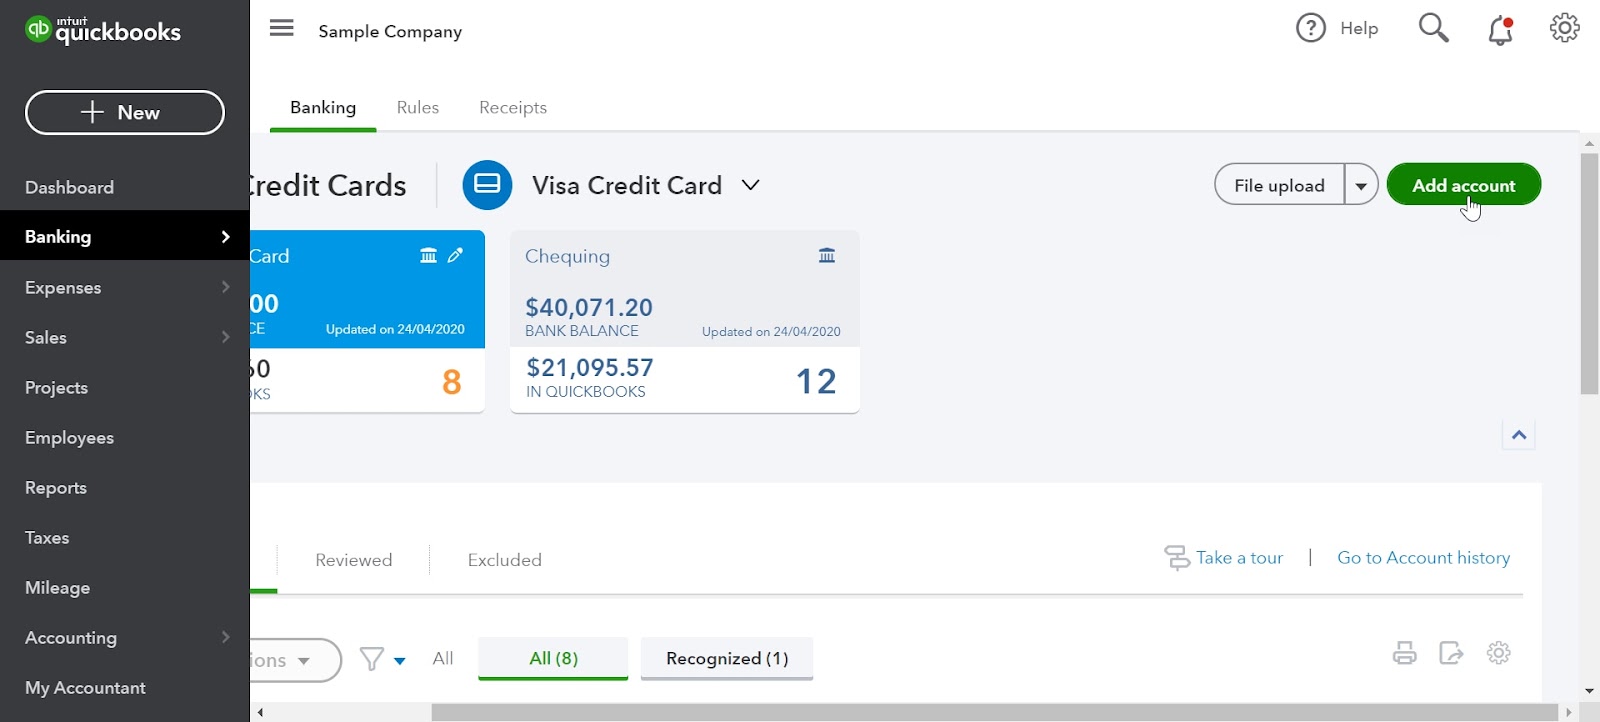 connect bank and credit card accounts in quickbooks online